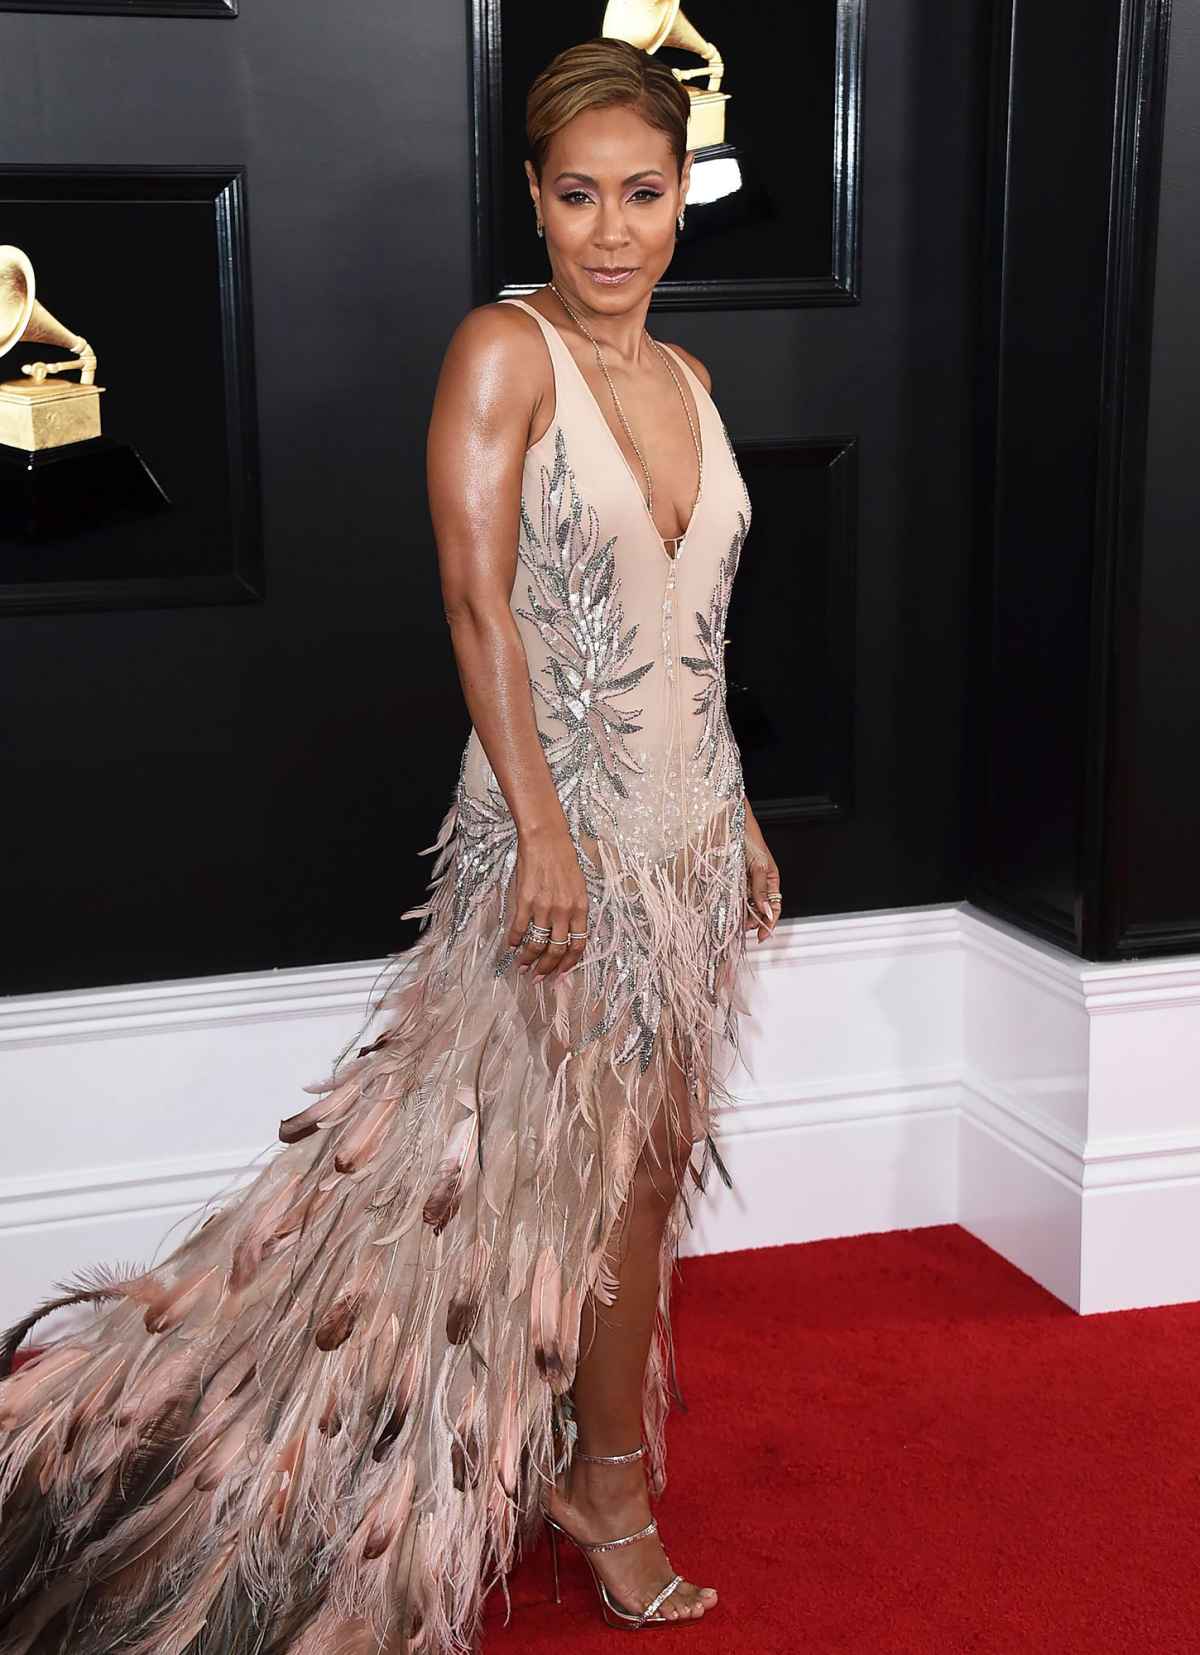 TOP 5 Best Red Carpet Dresses from 2017 GRAMMY AWARDS